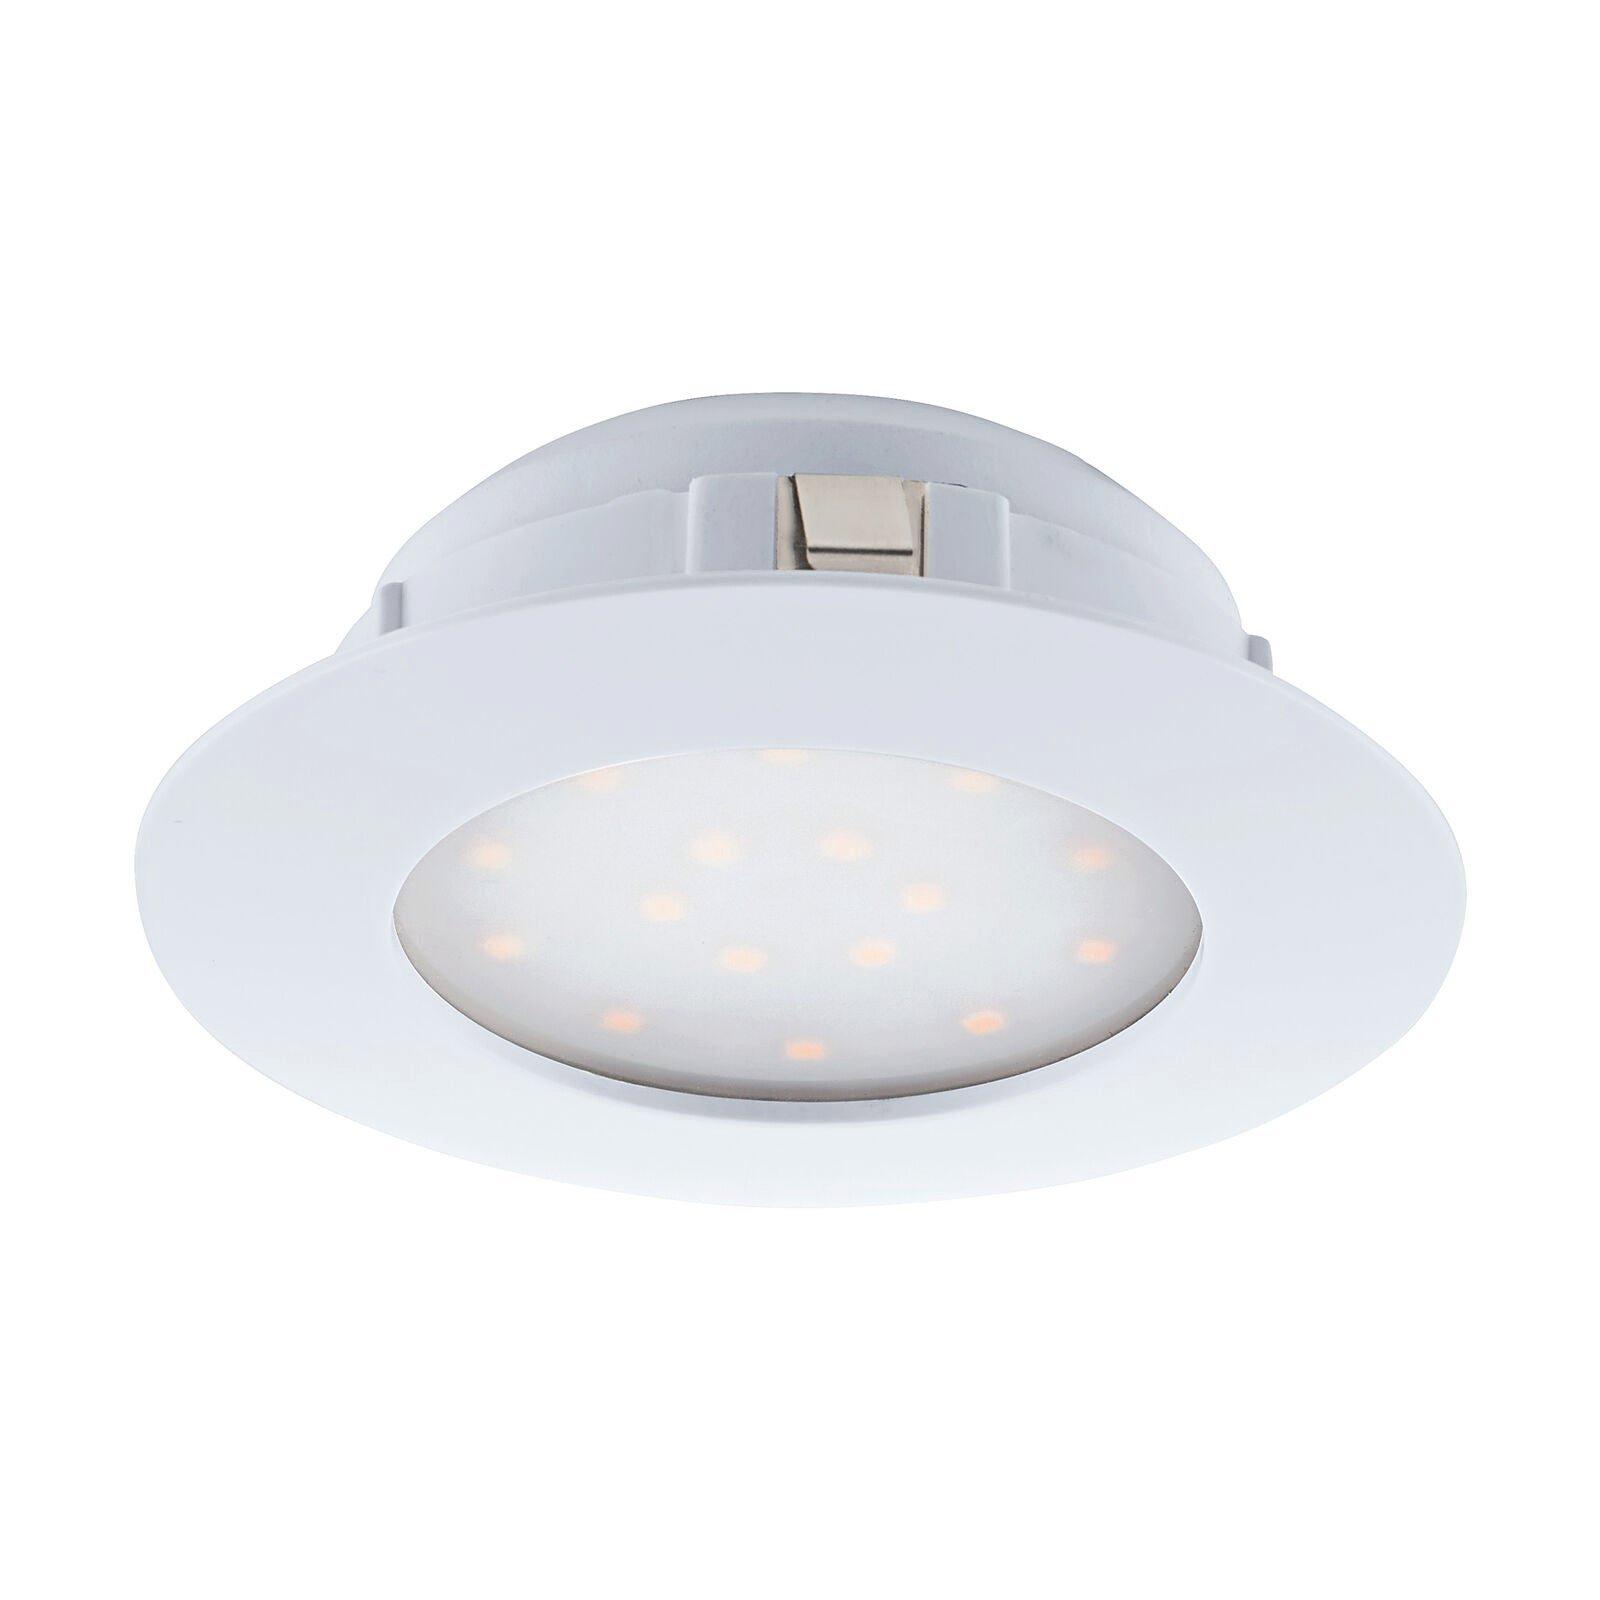 Wall / Ceiling Flush Downlight White Plastic 12W Built in LED 102mm Round